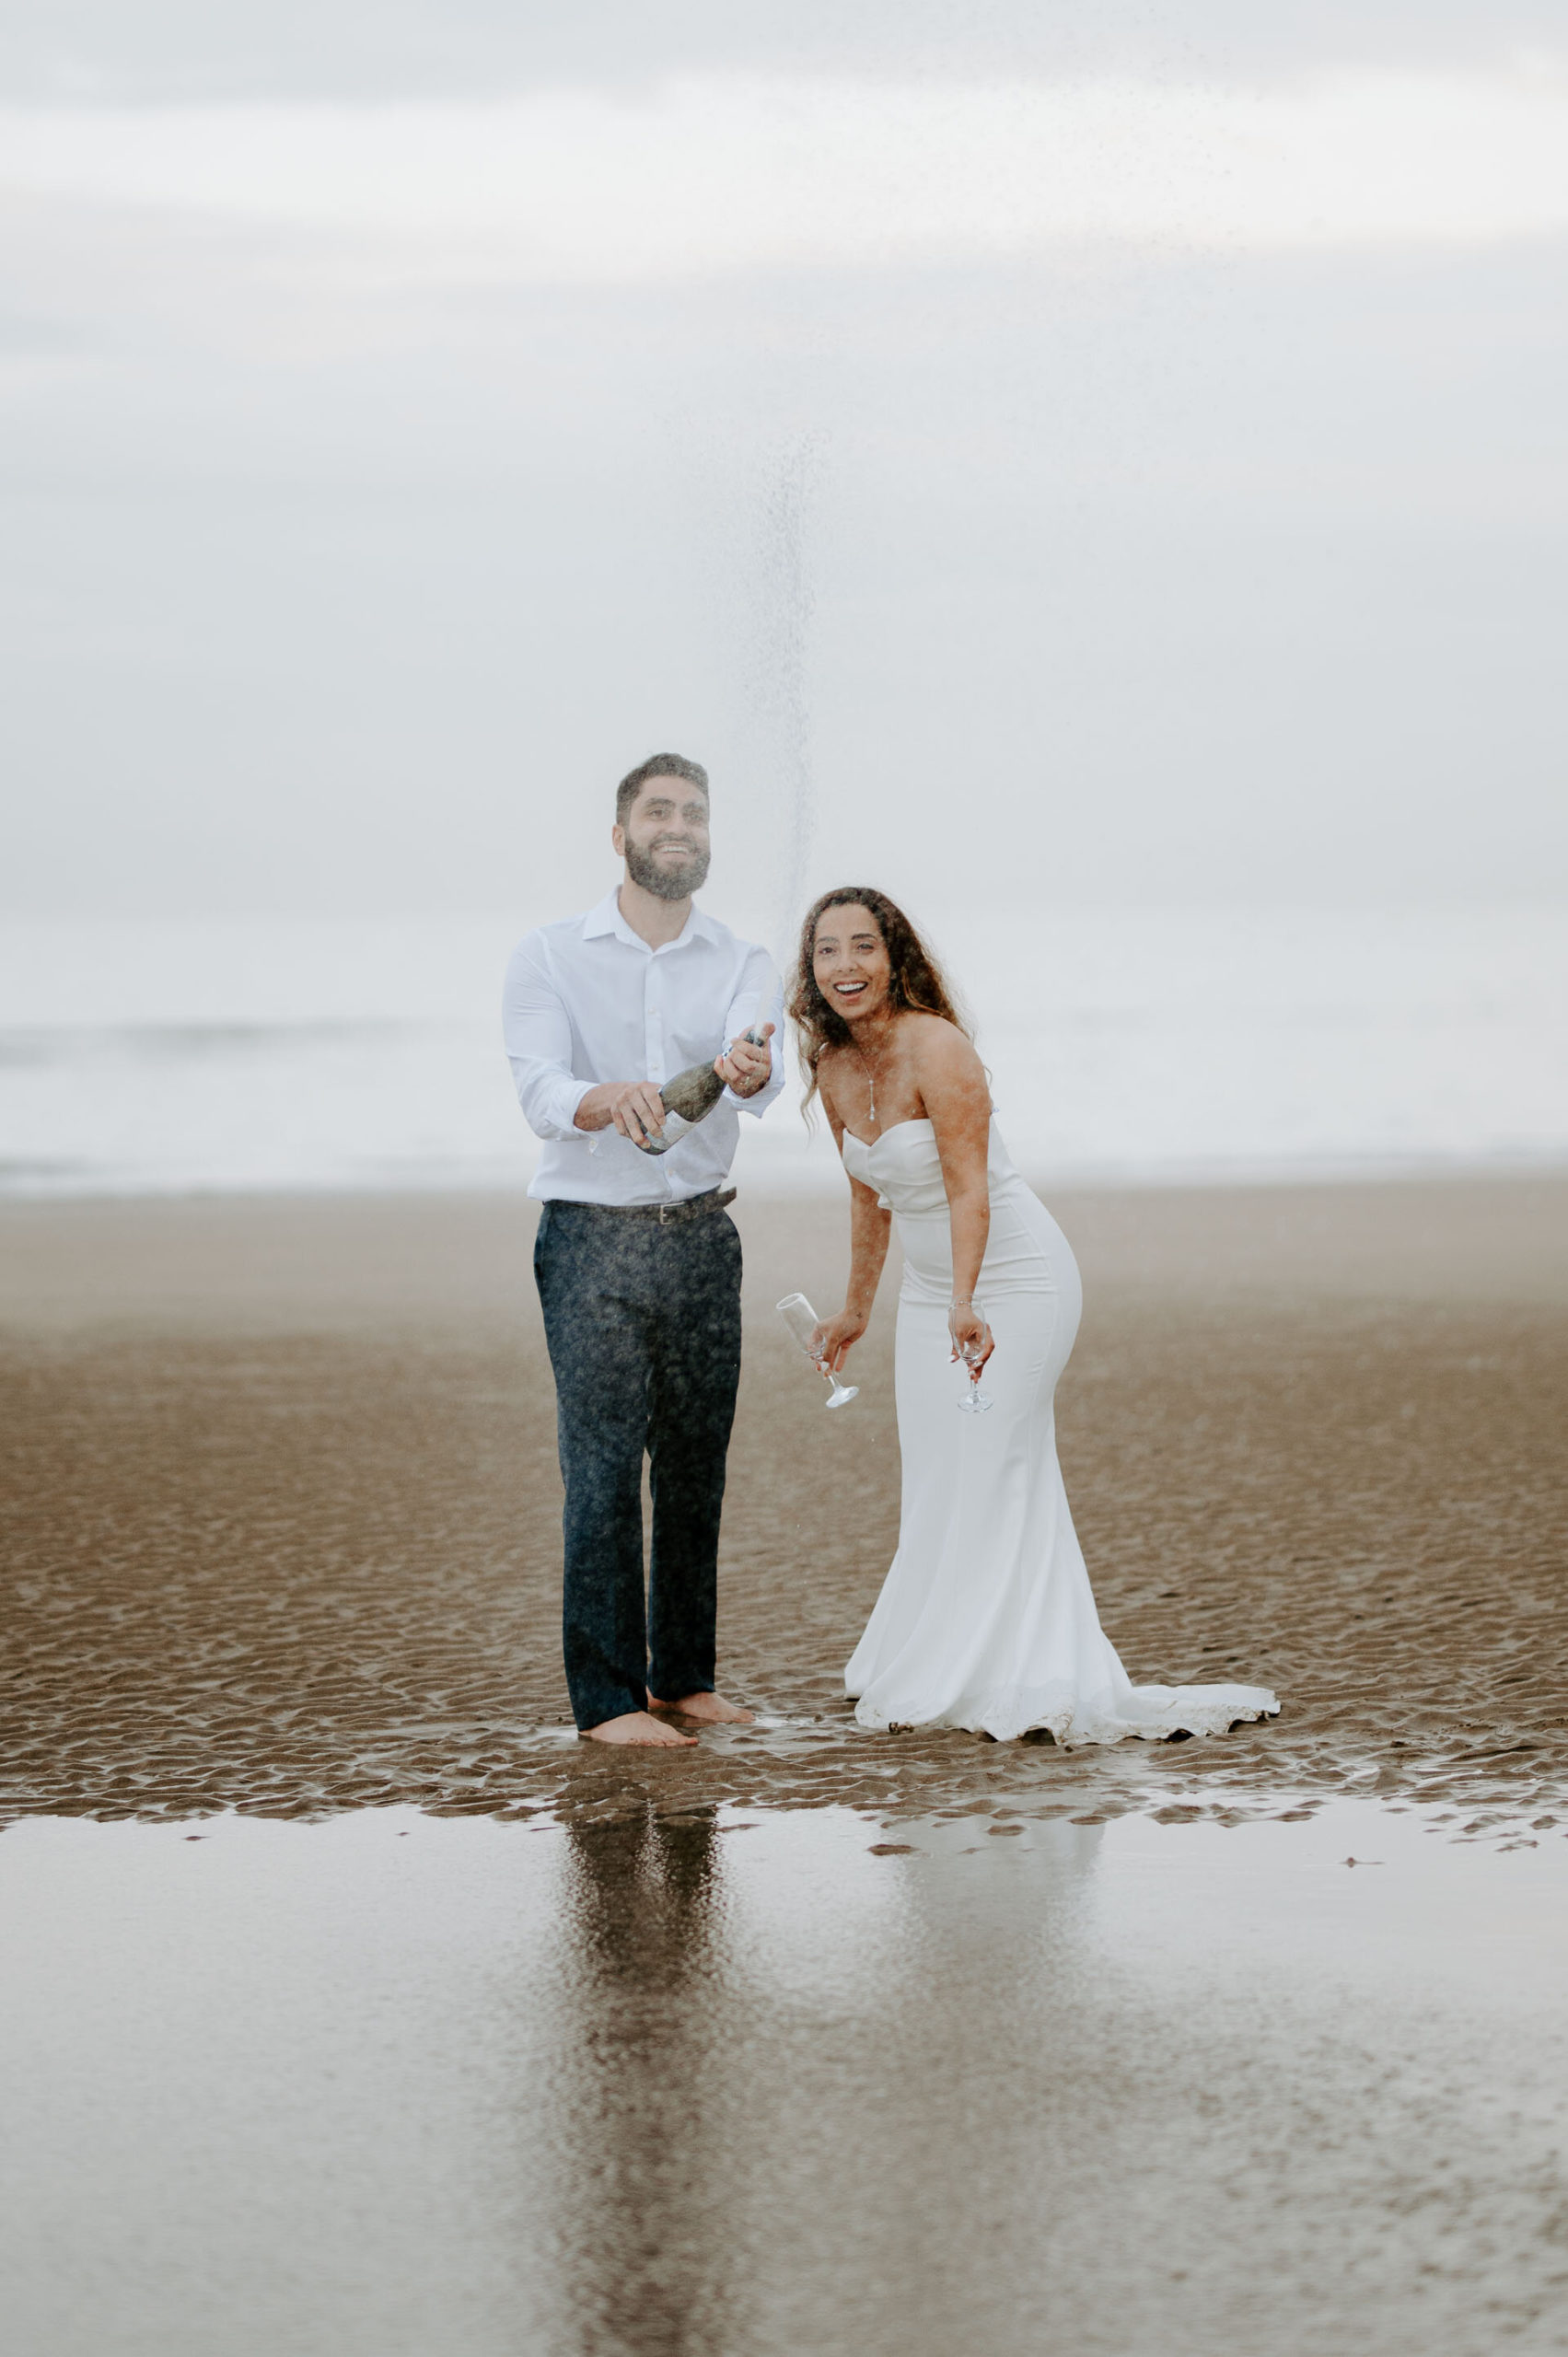 Demiana and Goergeuos - Camber Sands Golden Hour Beach Shoot - Laura Williams Photography-29.jpg